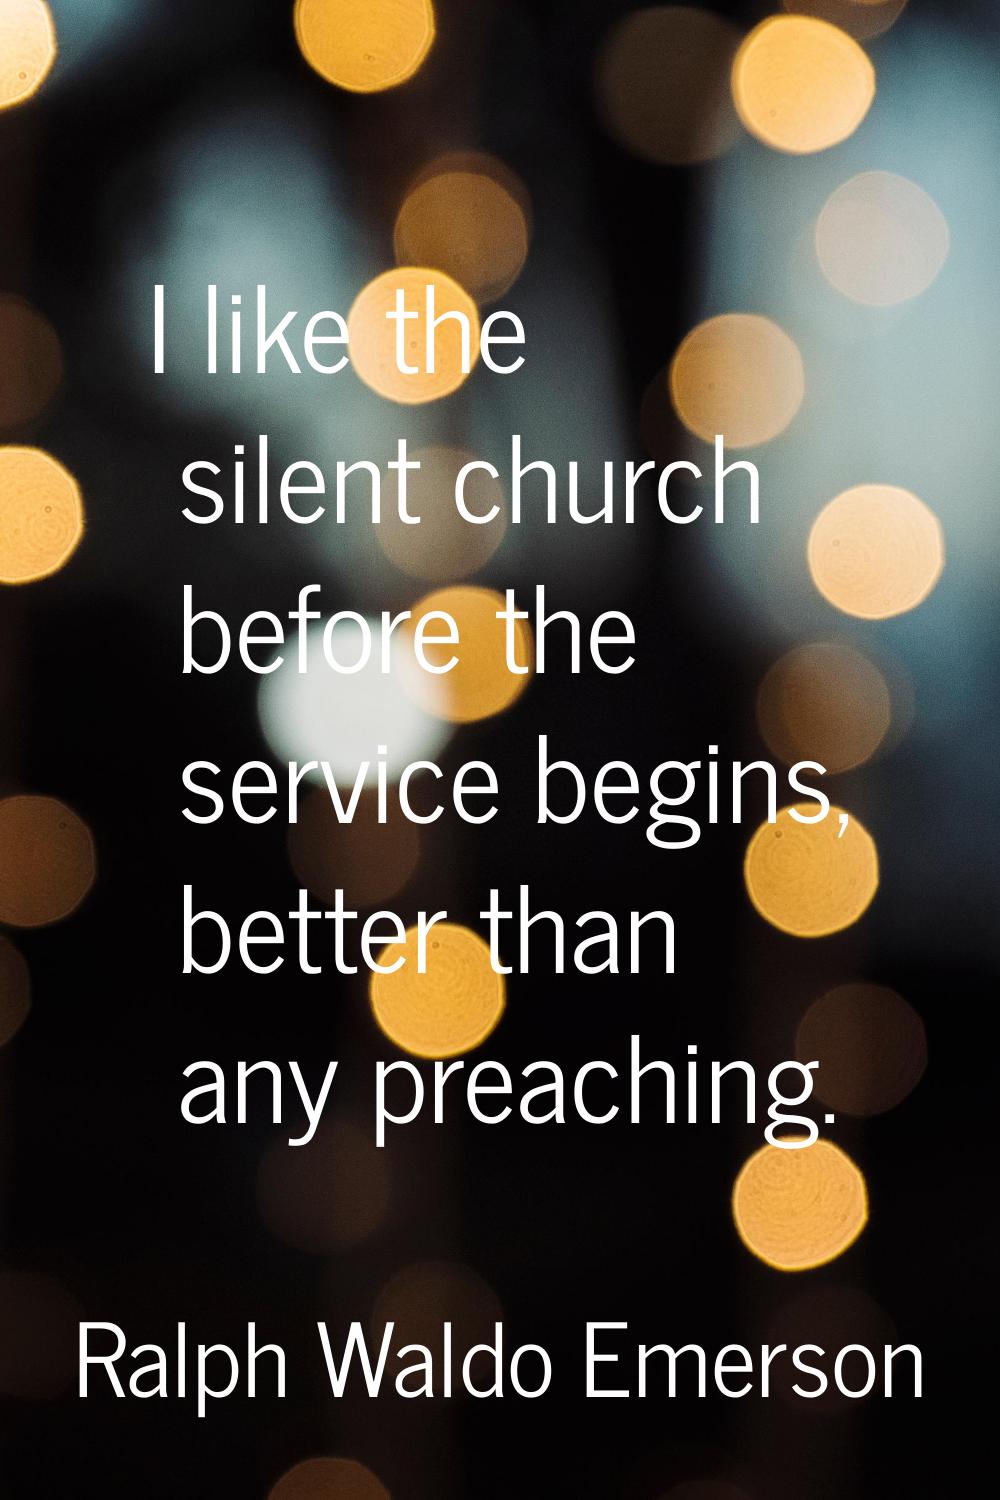 I like the silent church before the service begins, better than any preaching.